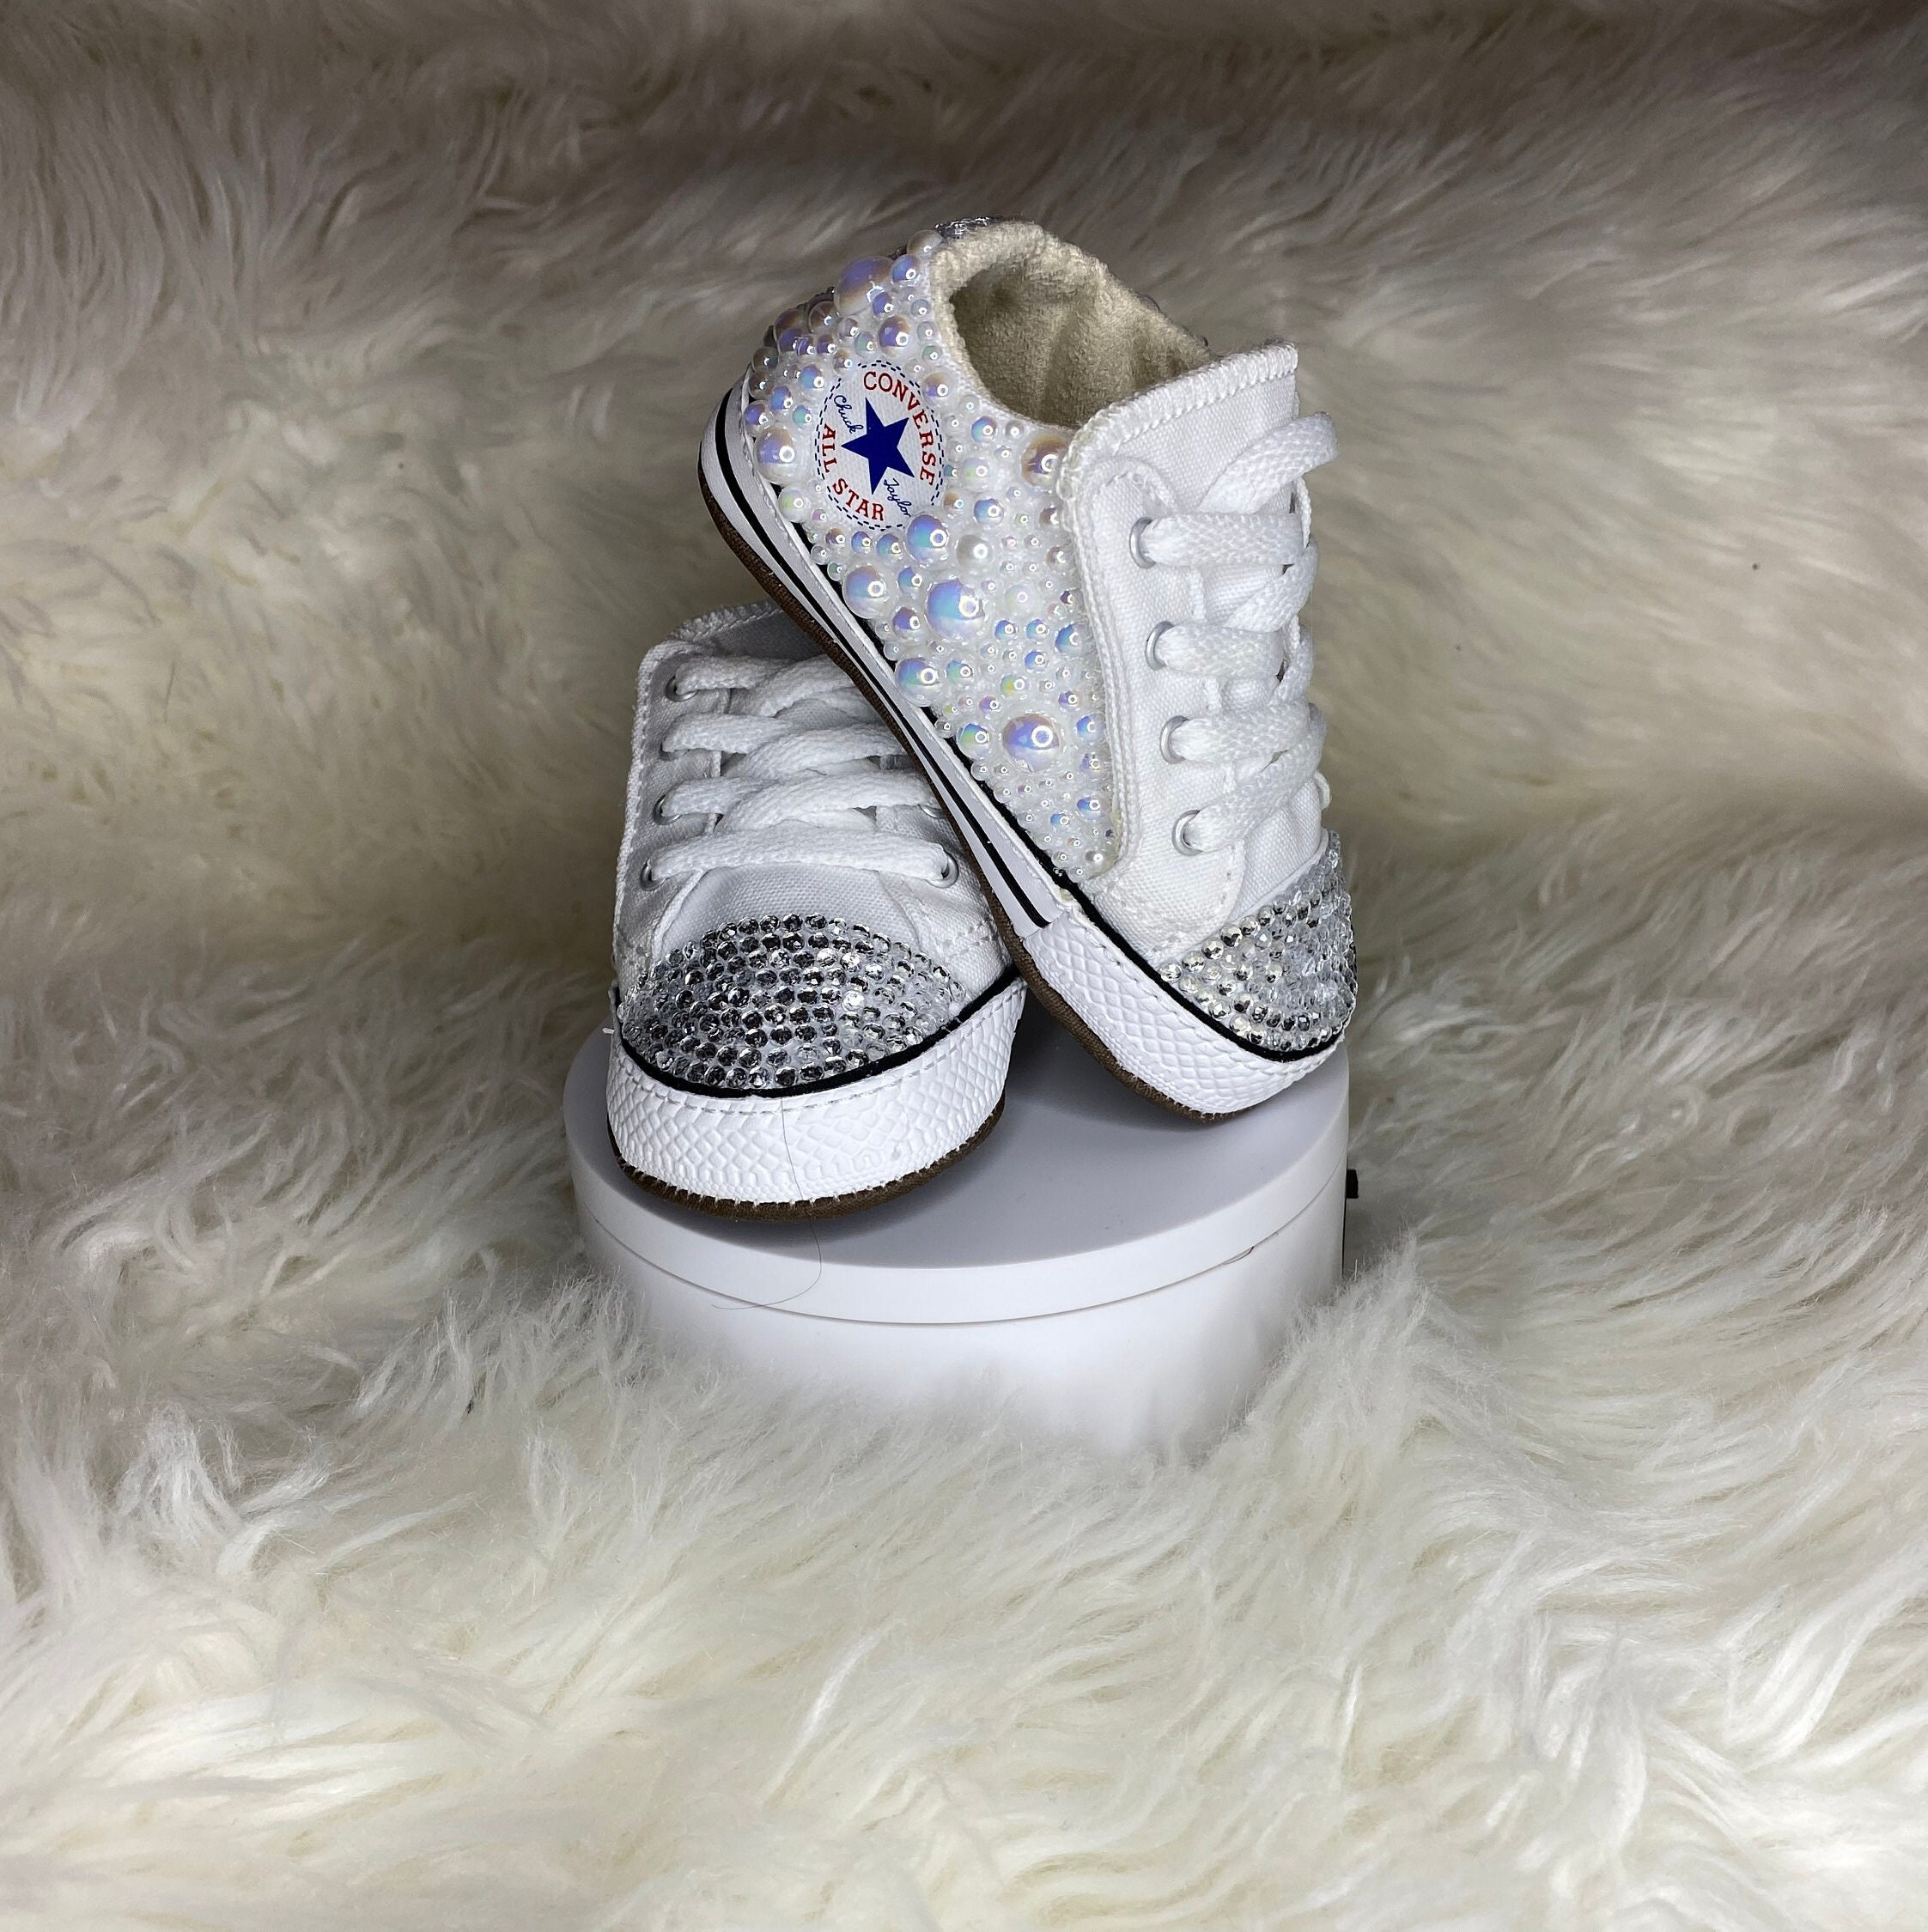 Baby girl shower gift sneakers Flower Girl shoes Rhinestone High Top Converse Chucks Schoenen Meisjesschoenen Sneakers & Sportschoenen 1st Birthday shoes Infant Toddler Pearl Converse 